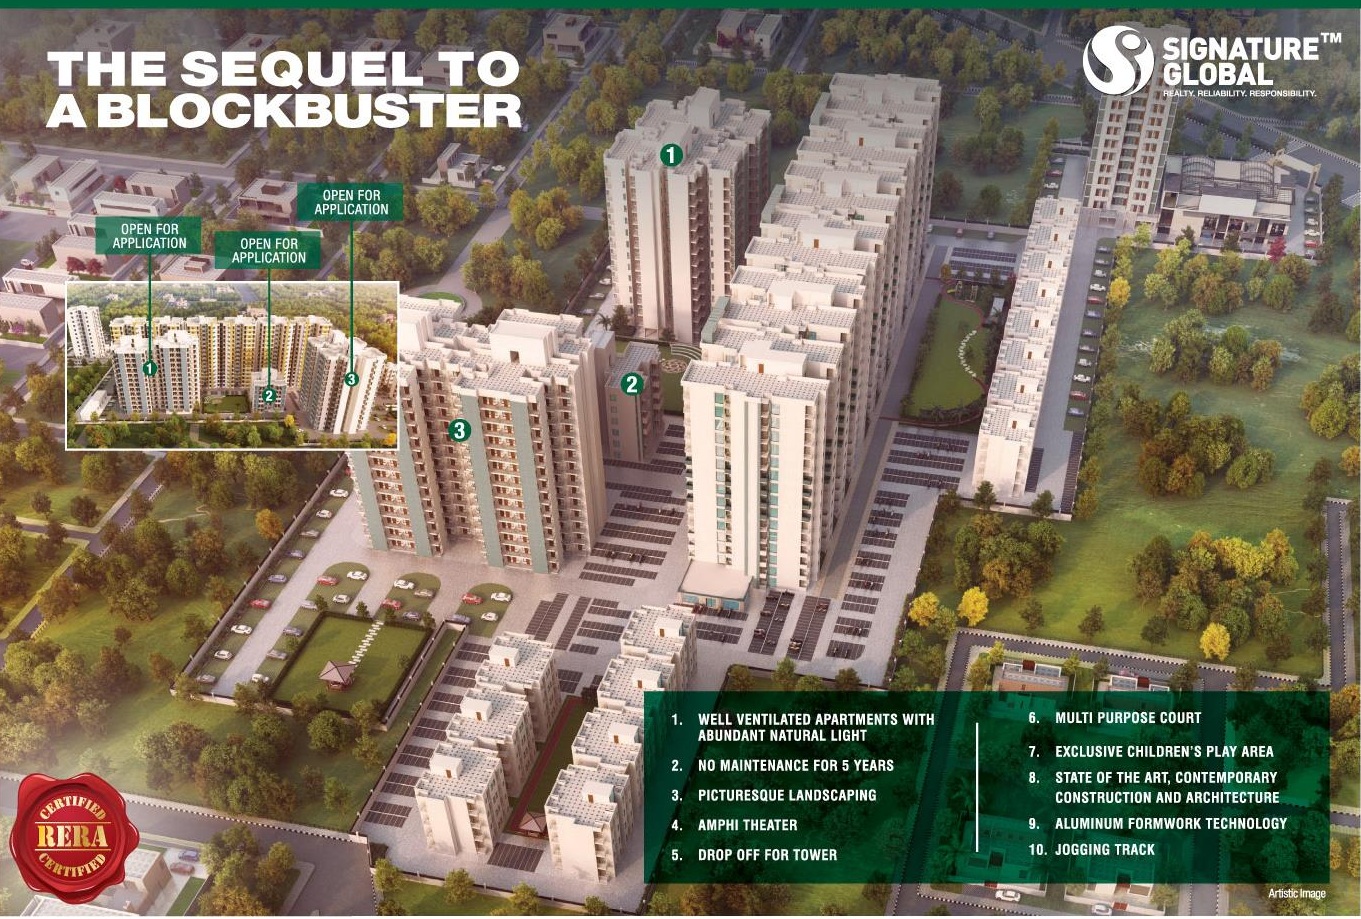 Signature Global Solera 2 Sector 107 Gurgaon is under construction affordable housing Project. This Location of the property is near Dwarka Expressway and Najafgarh boarder